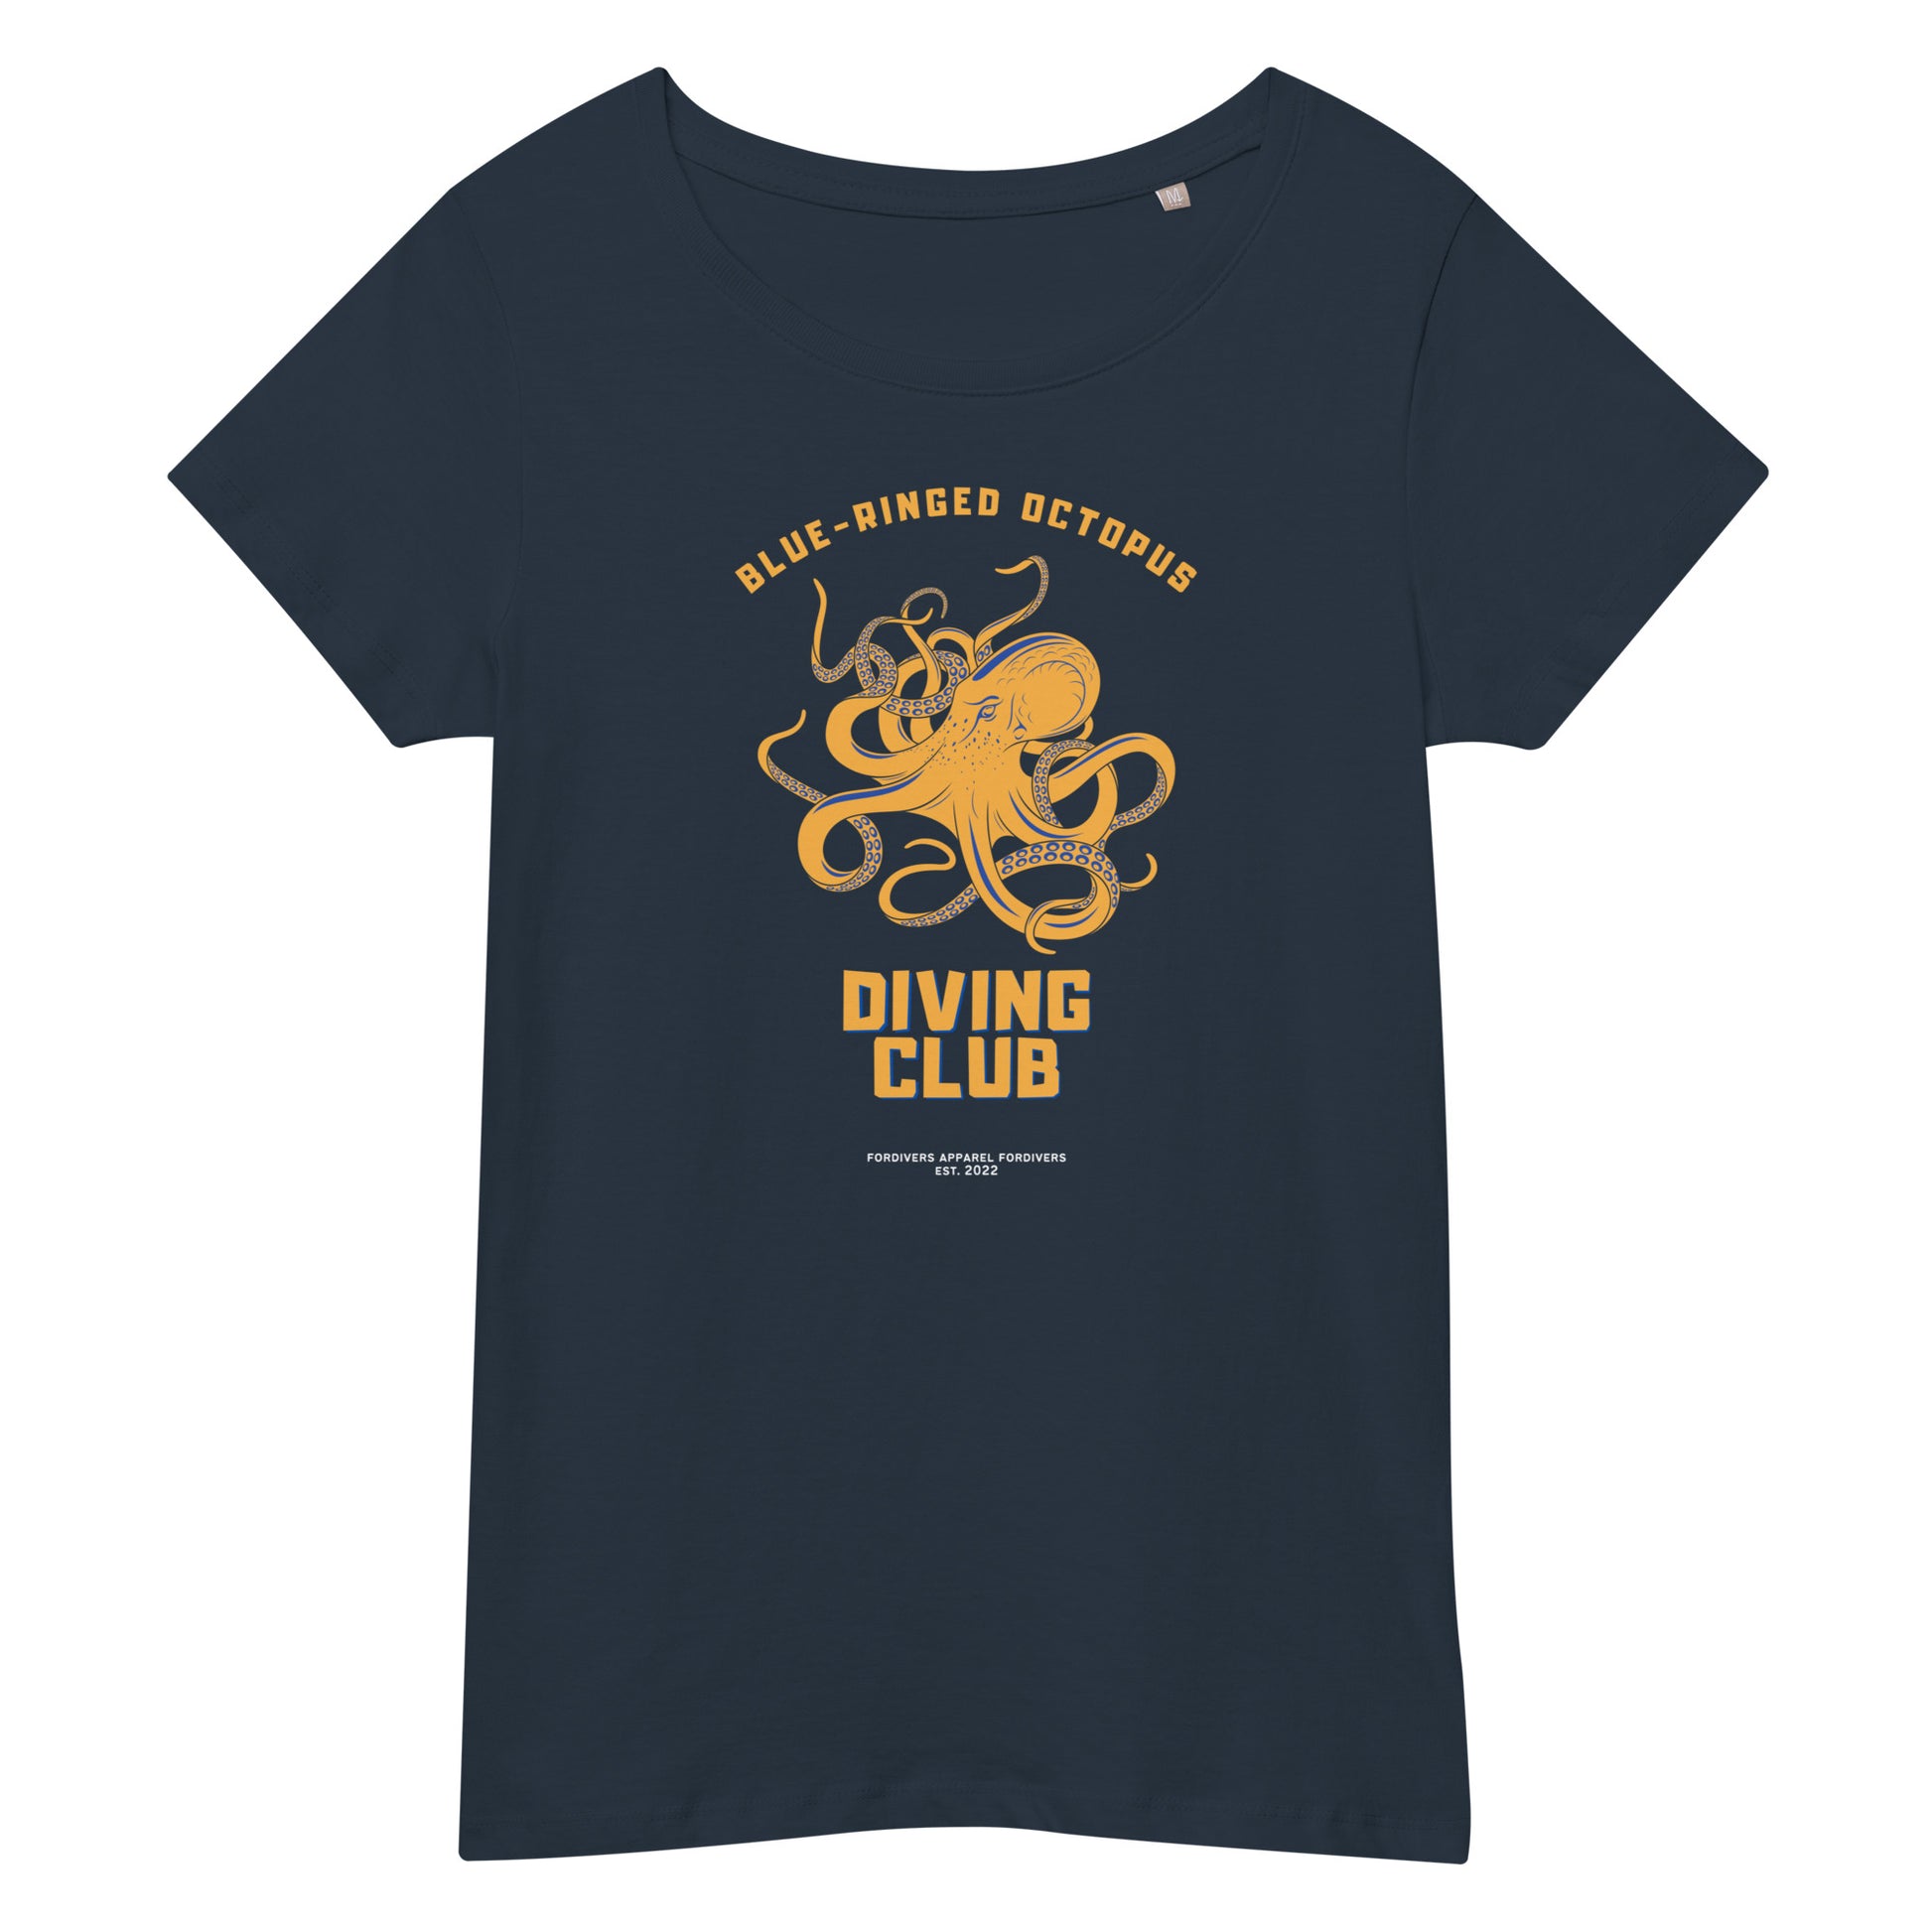 blue-ringed octopus woman's t-shirt